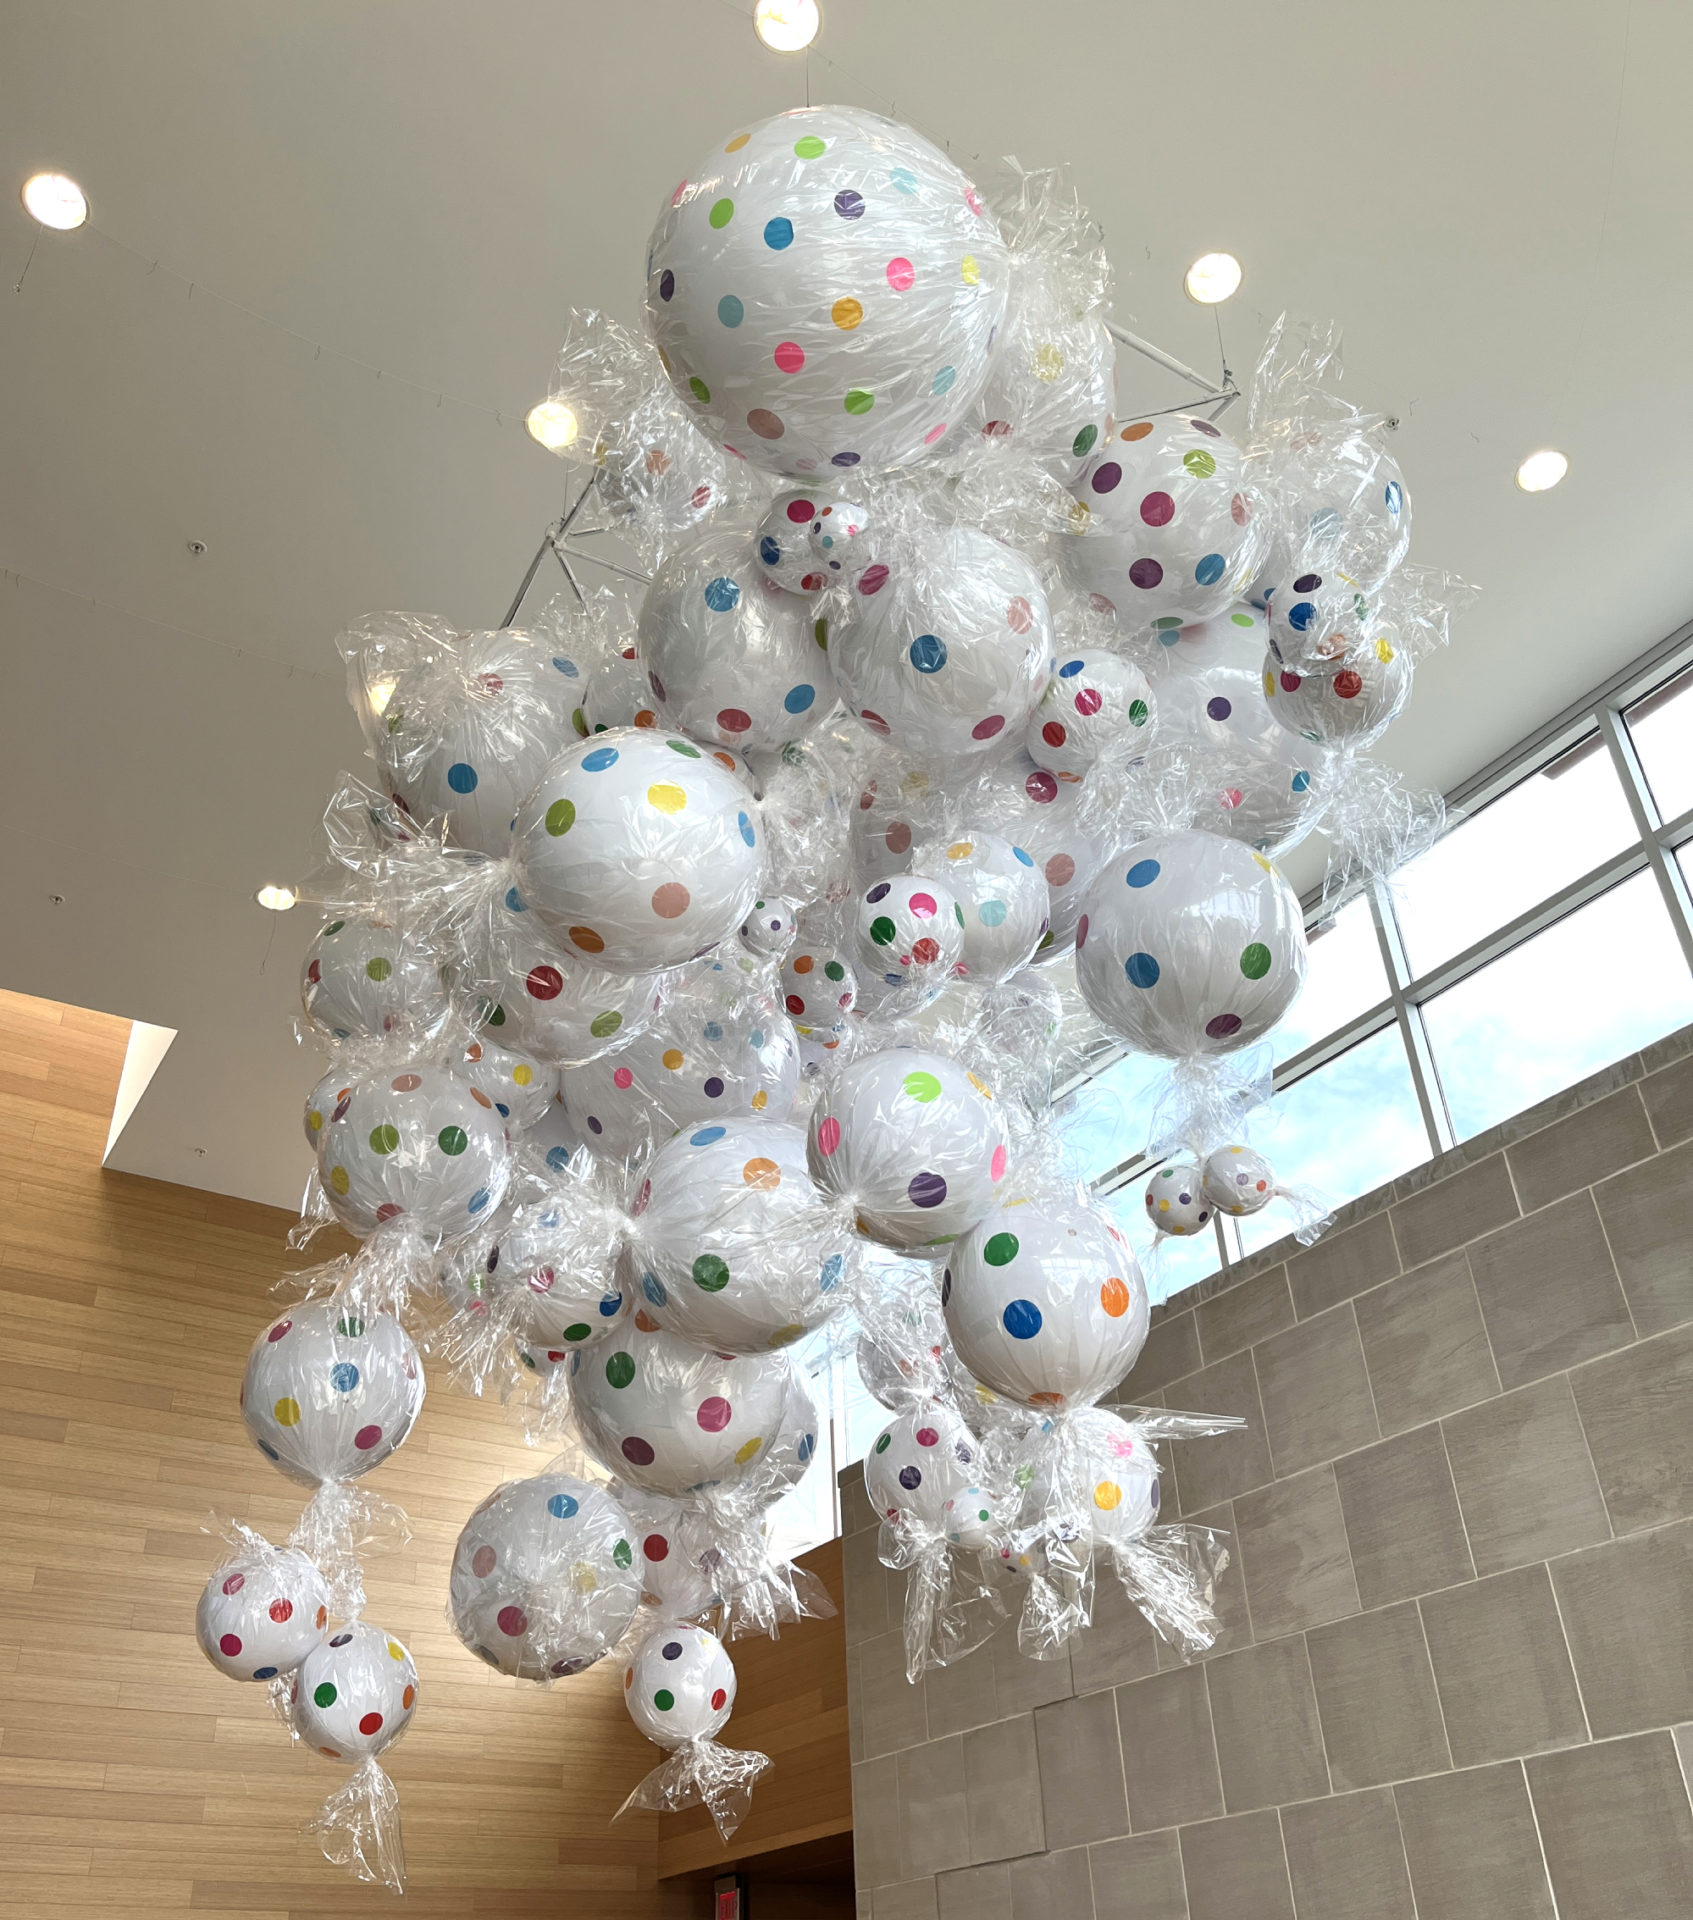 Installation hanging from the ceiling of the Champaign Public Library lobby. A lot of sculptures that are made to look like wrapped candies are large, white with colorful polka dots and clear wrappers.